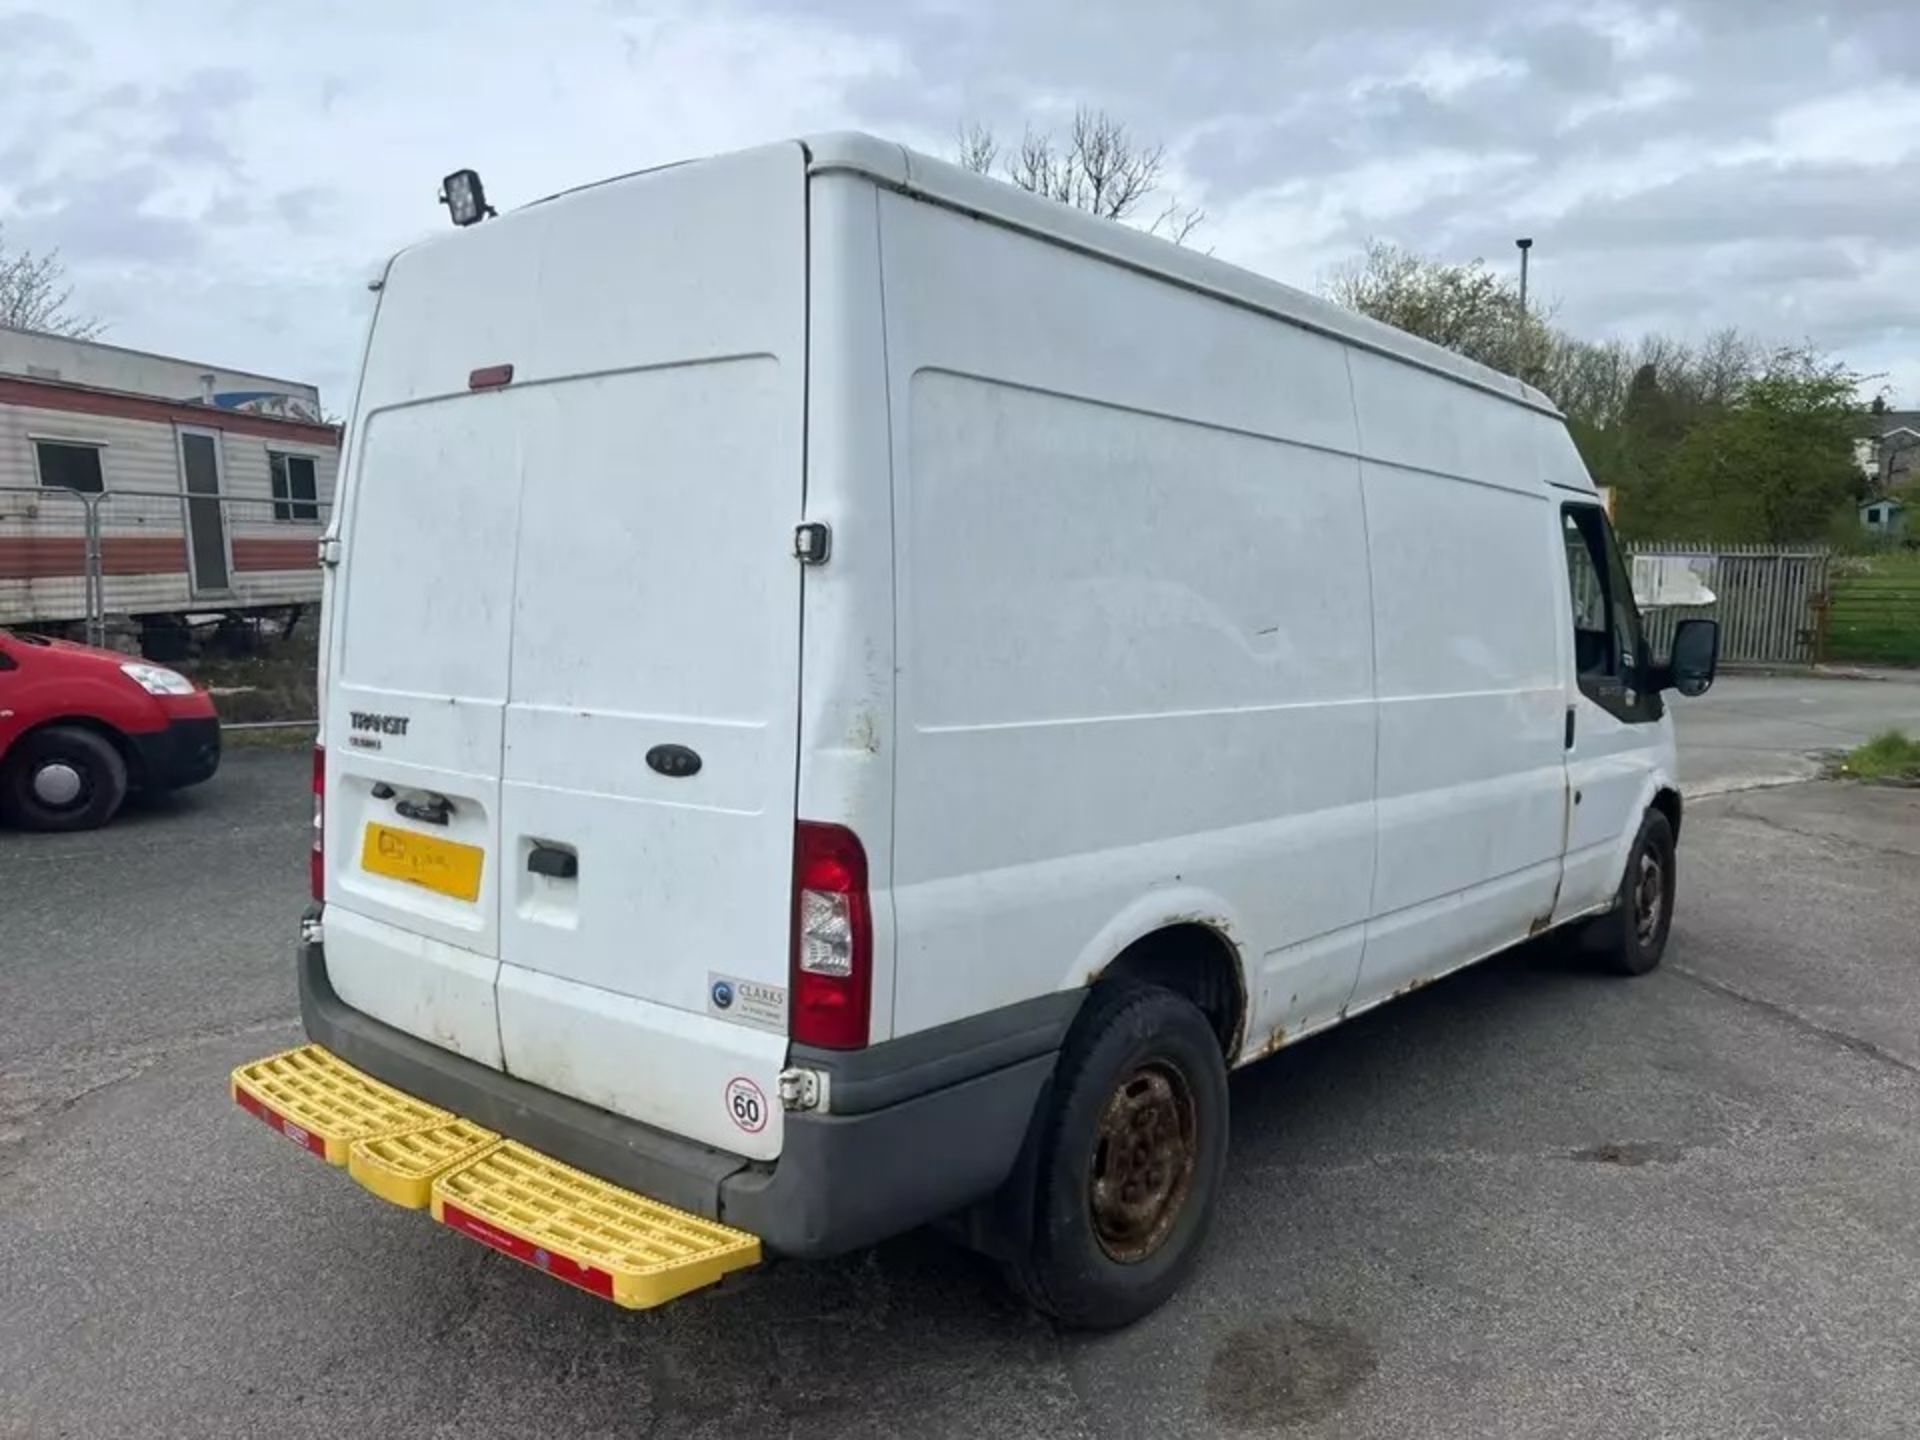 2011 FORD TRANSIT LWB PANEL VAN - IDEAL FOR REPAIR OR PARTS, 1 OWNER, HPI CLEAR - Image 10 of 20